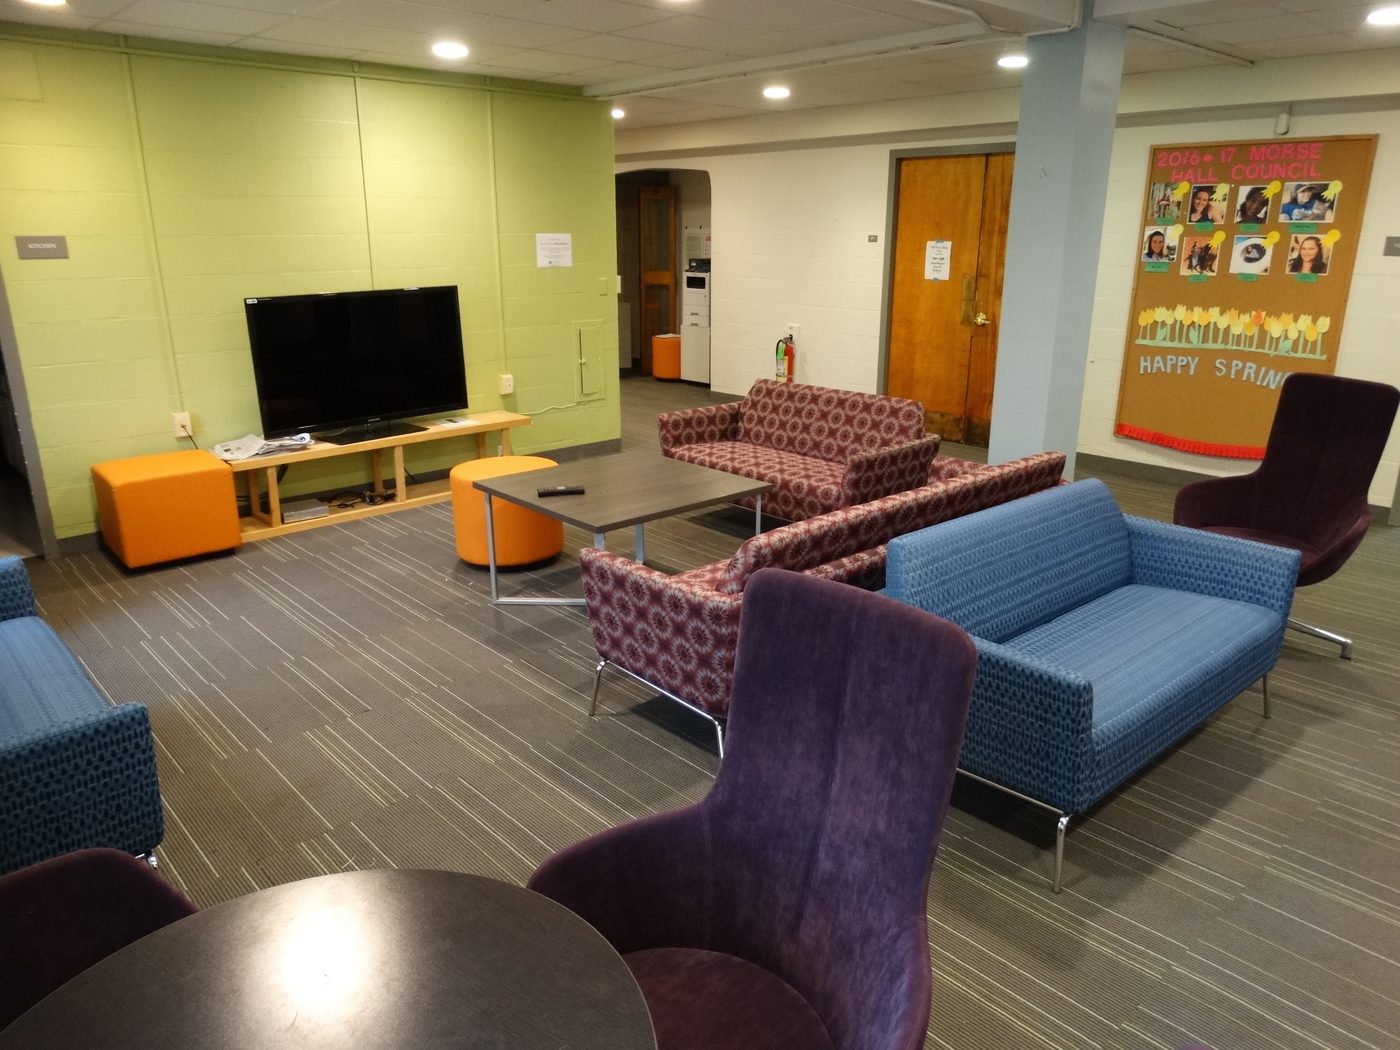 Common area for students with television and furnitures